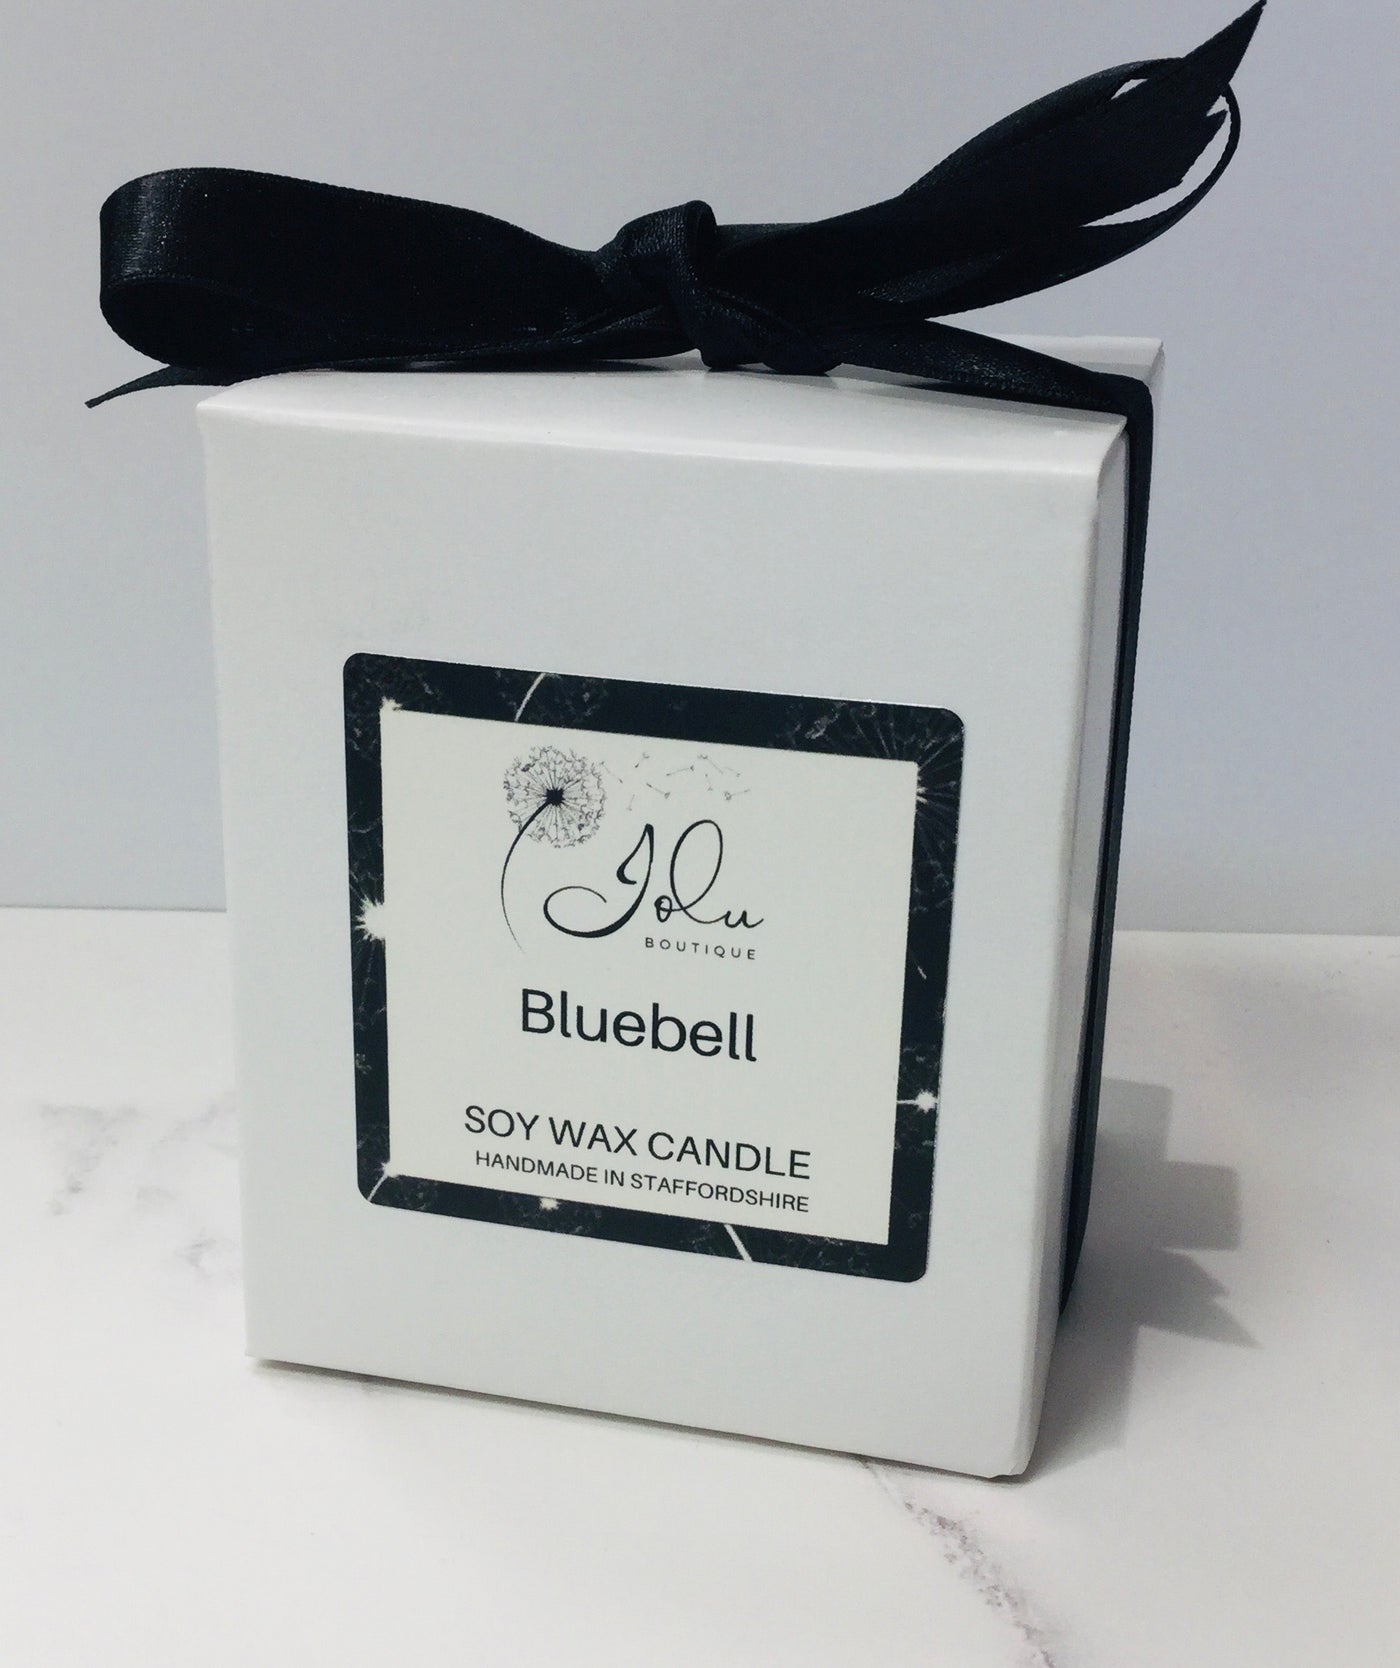 Jolu Boutique Bluebell Soy Wax Candle